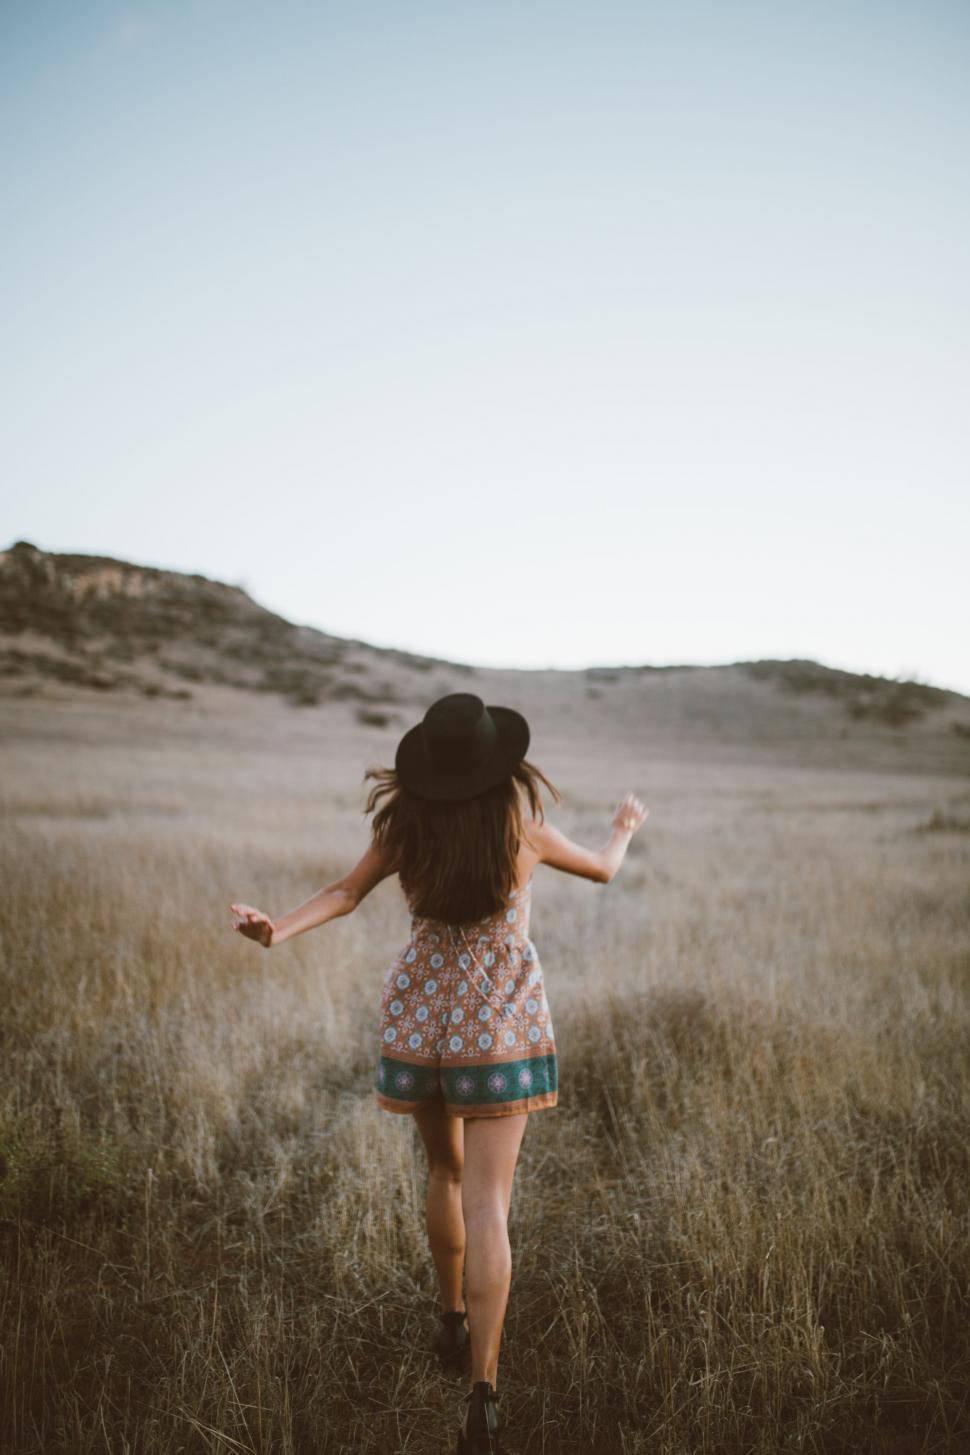 Free Image of Young Girl Walking Through a Field of Tall Grass 